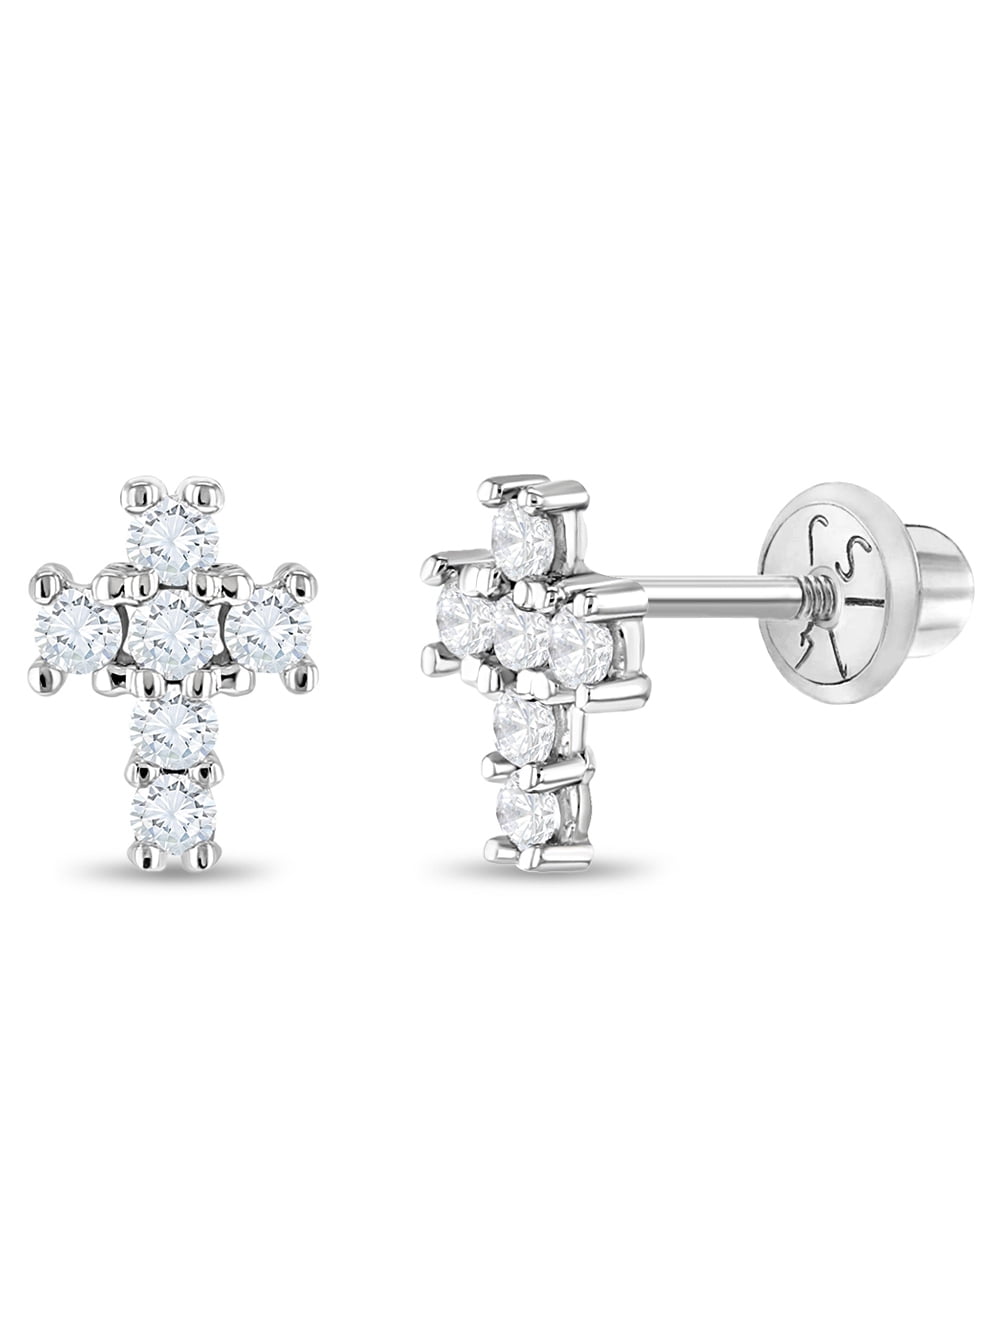 14kt White Gold 3mm Cubic Zirconia Long Post Studs Ear Piercing Kit with  Ear Care Solution